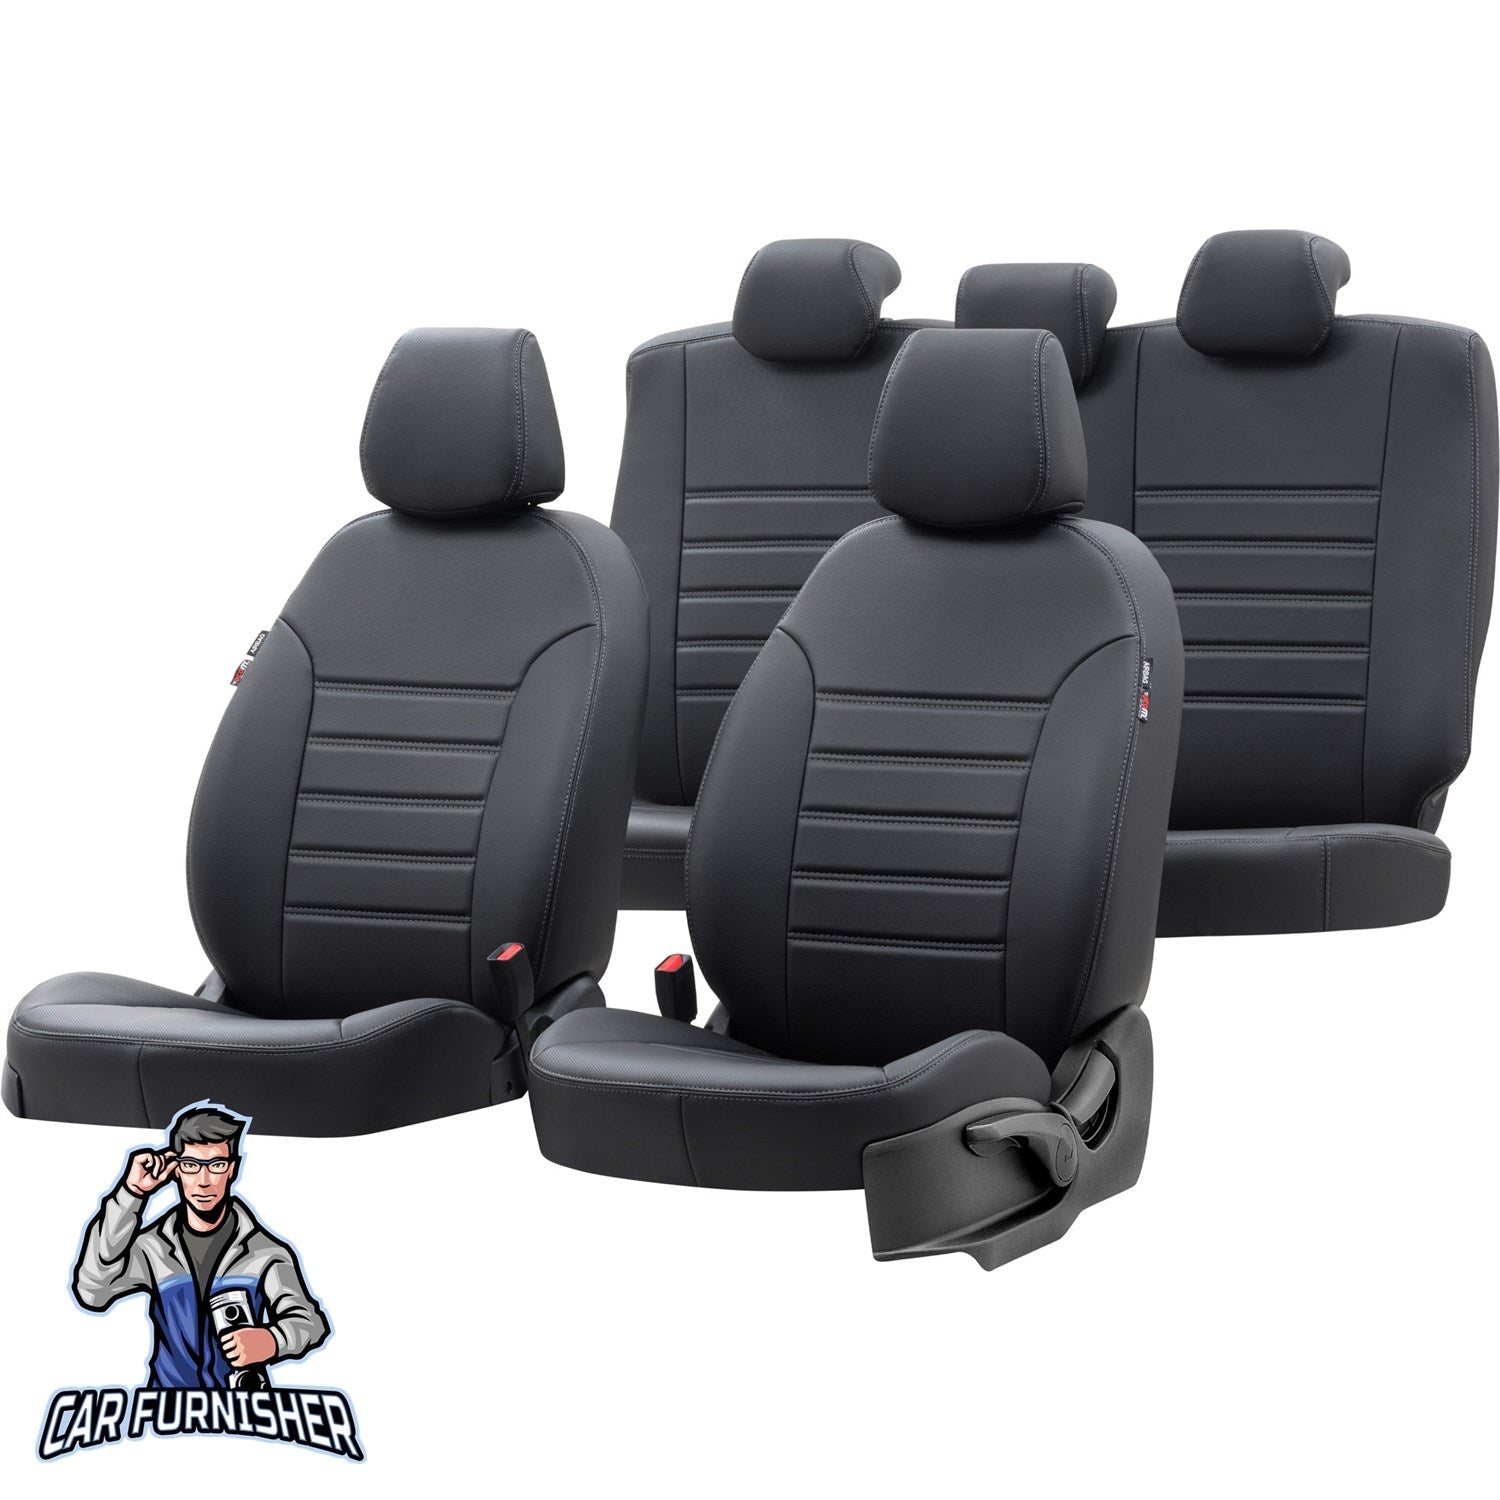 Toyota Corolla Seat Cover Istanbul Leather Design Black Leather